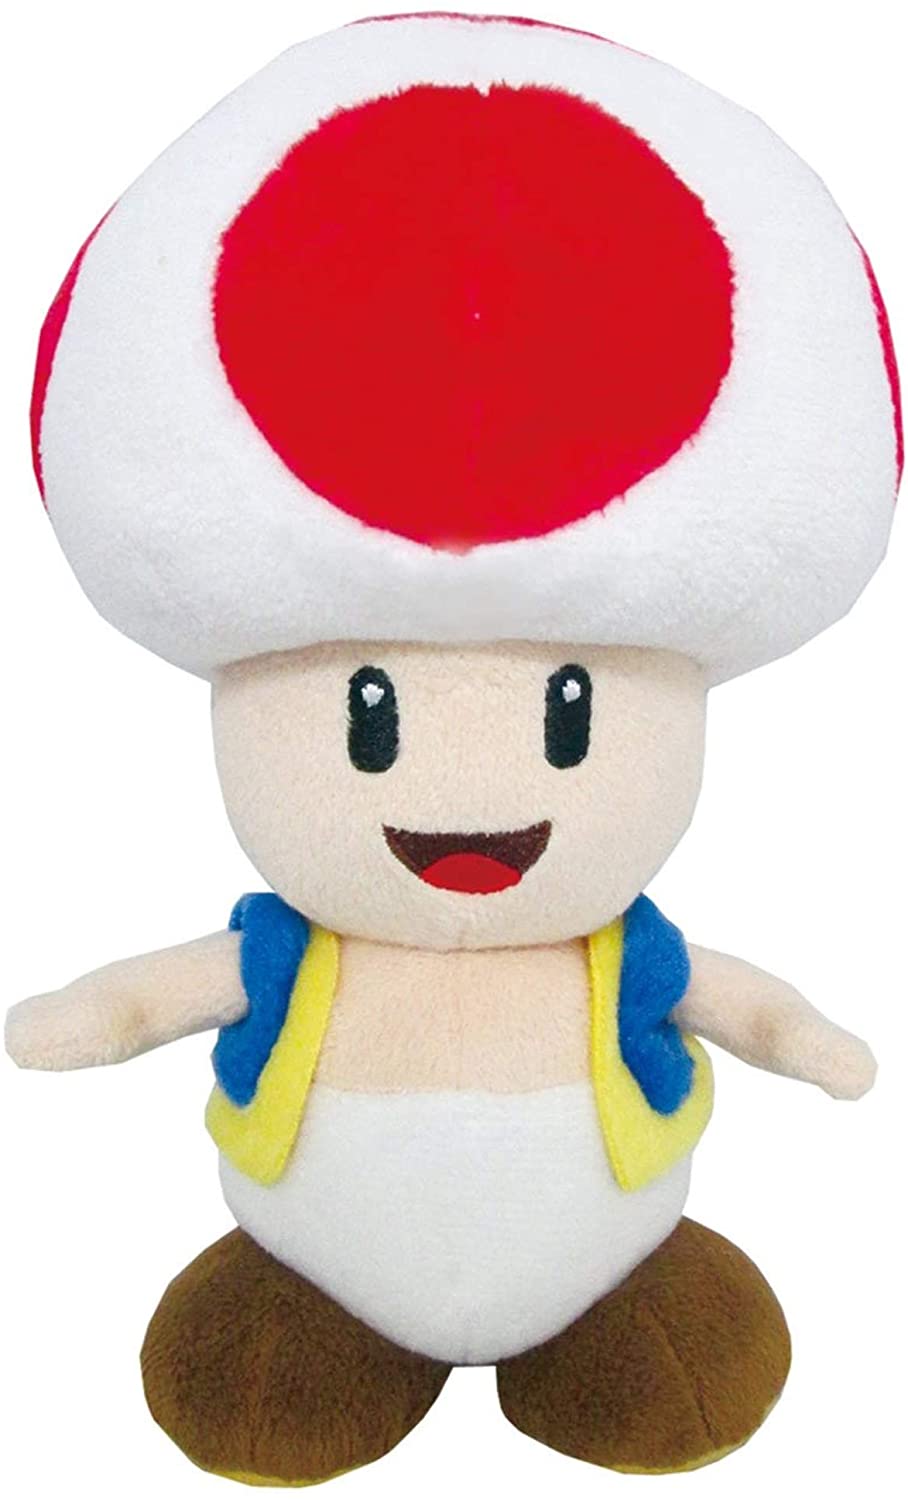 Super Mario All Star Collection Toad Stuffed Plush 7.5